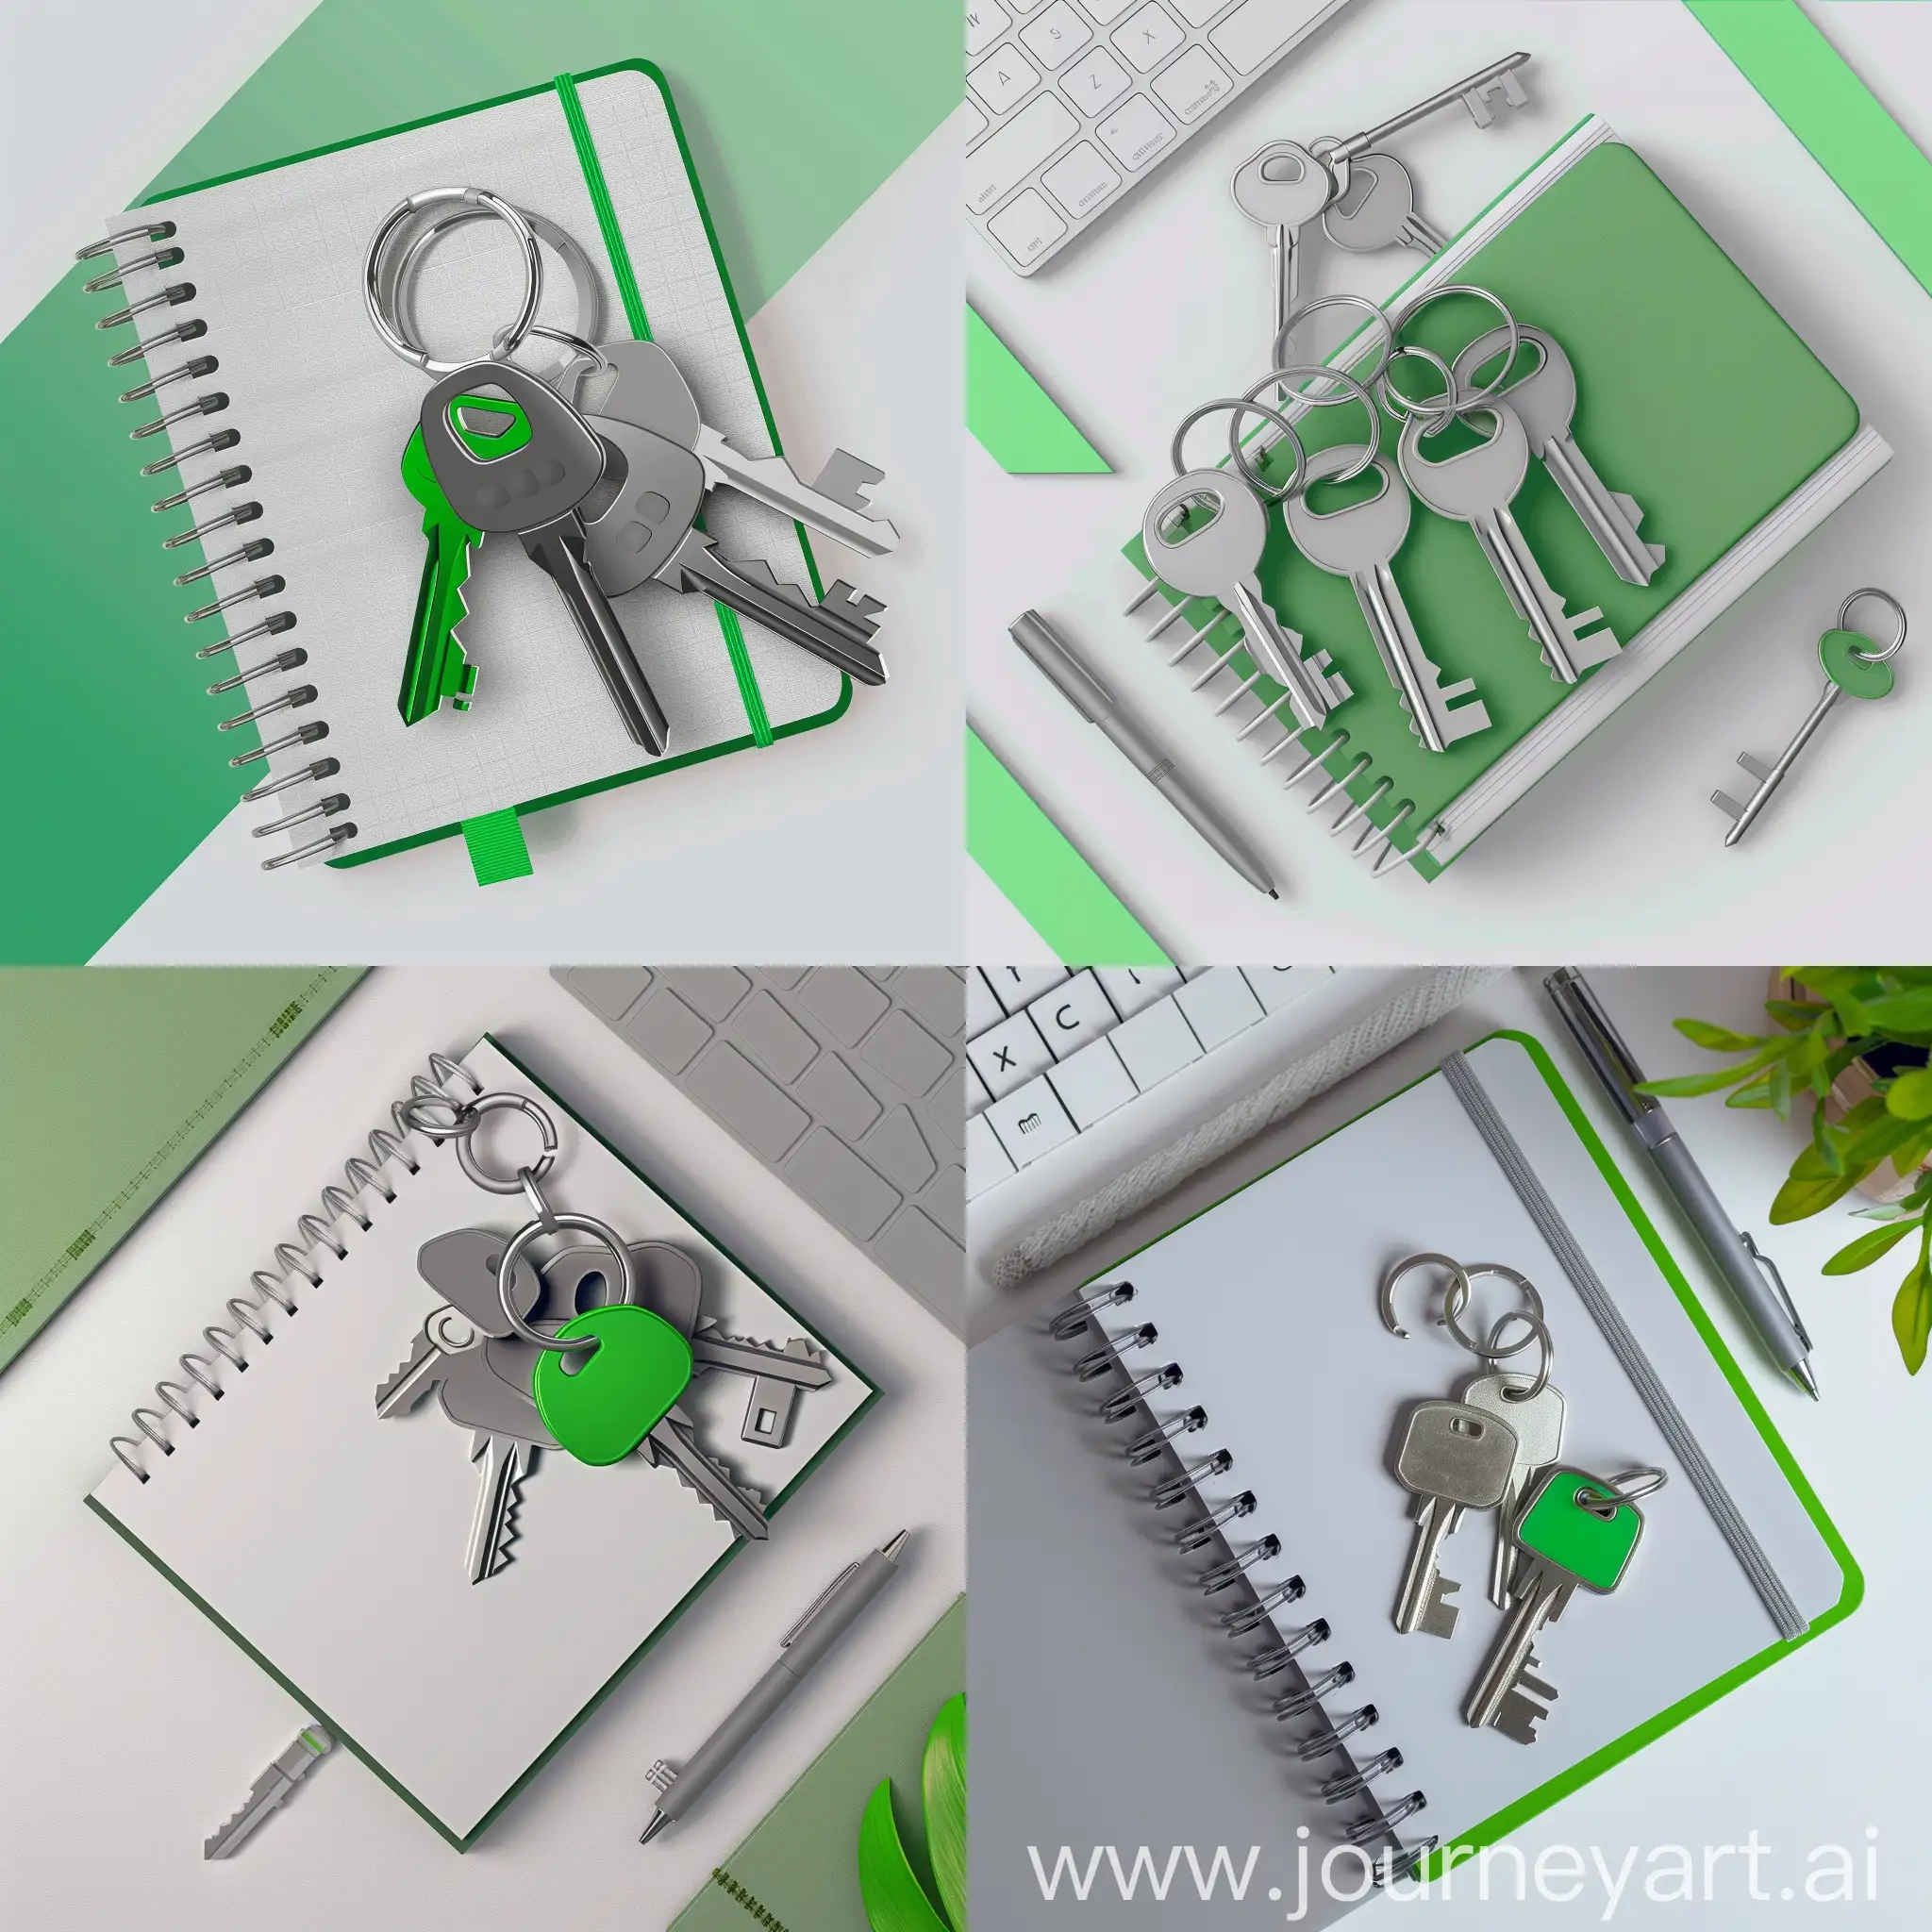 Create an image of a notebook with desktop background with stylized house keys and keychain in green and gray. This will be used as a symbol to represent the process of electronic real estate registration. Make sure the design looks modern and visually appealing while keeping it simple and easily recognizable. No background.